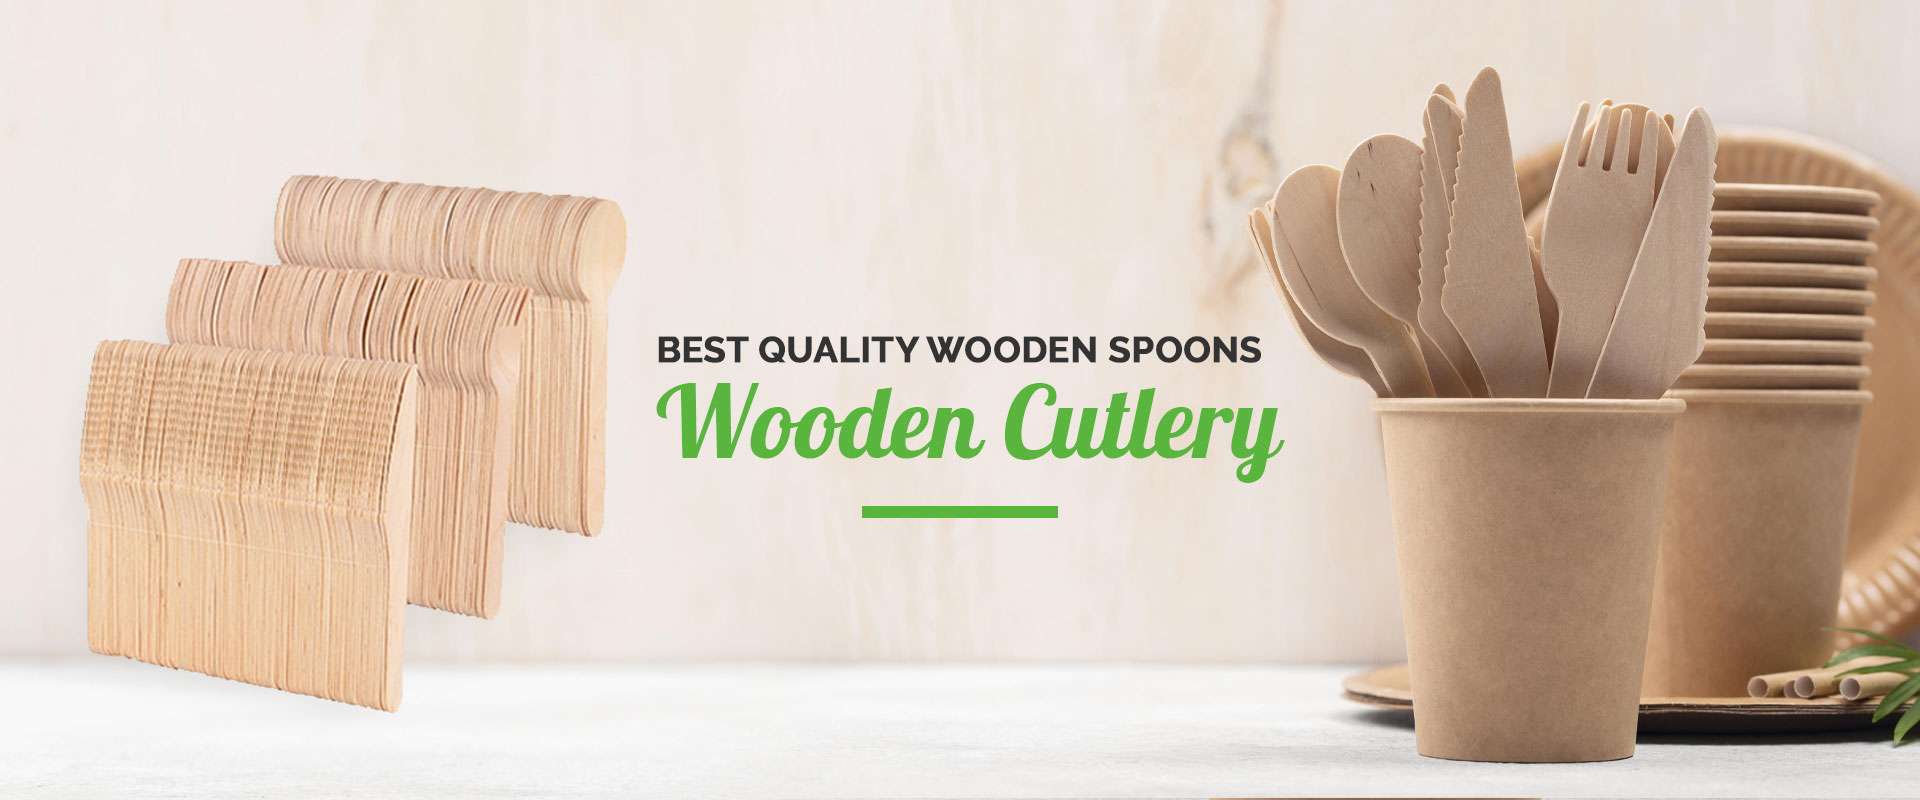  Wooden Cutlery Manufacturers in Maharashtra